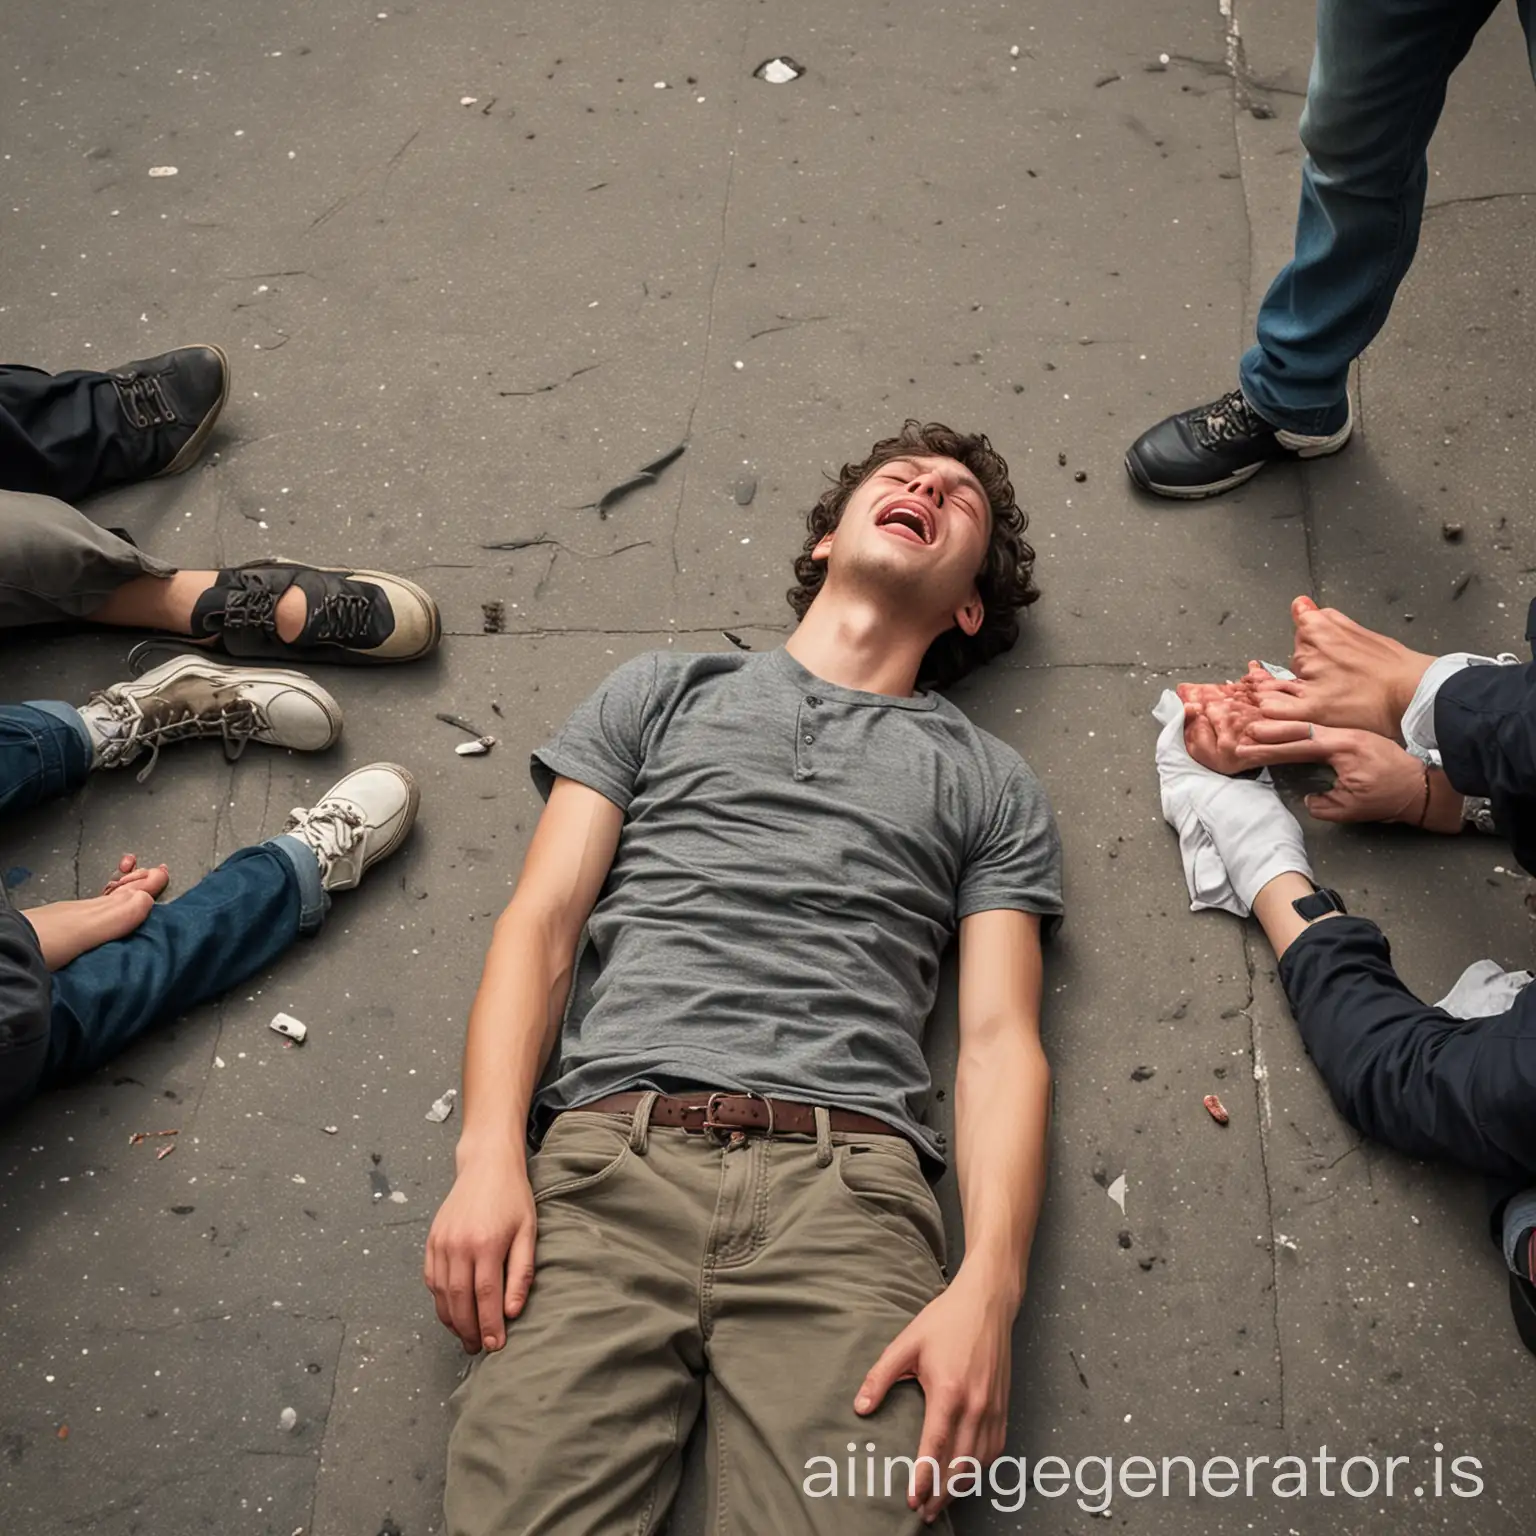 show a complete body of just one young man  lying down on the ground of a streed having a seizure , a convulsion: teeth are clinching , arms are stretched in front of the body He is surrounded by bystanders astonished
 
